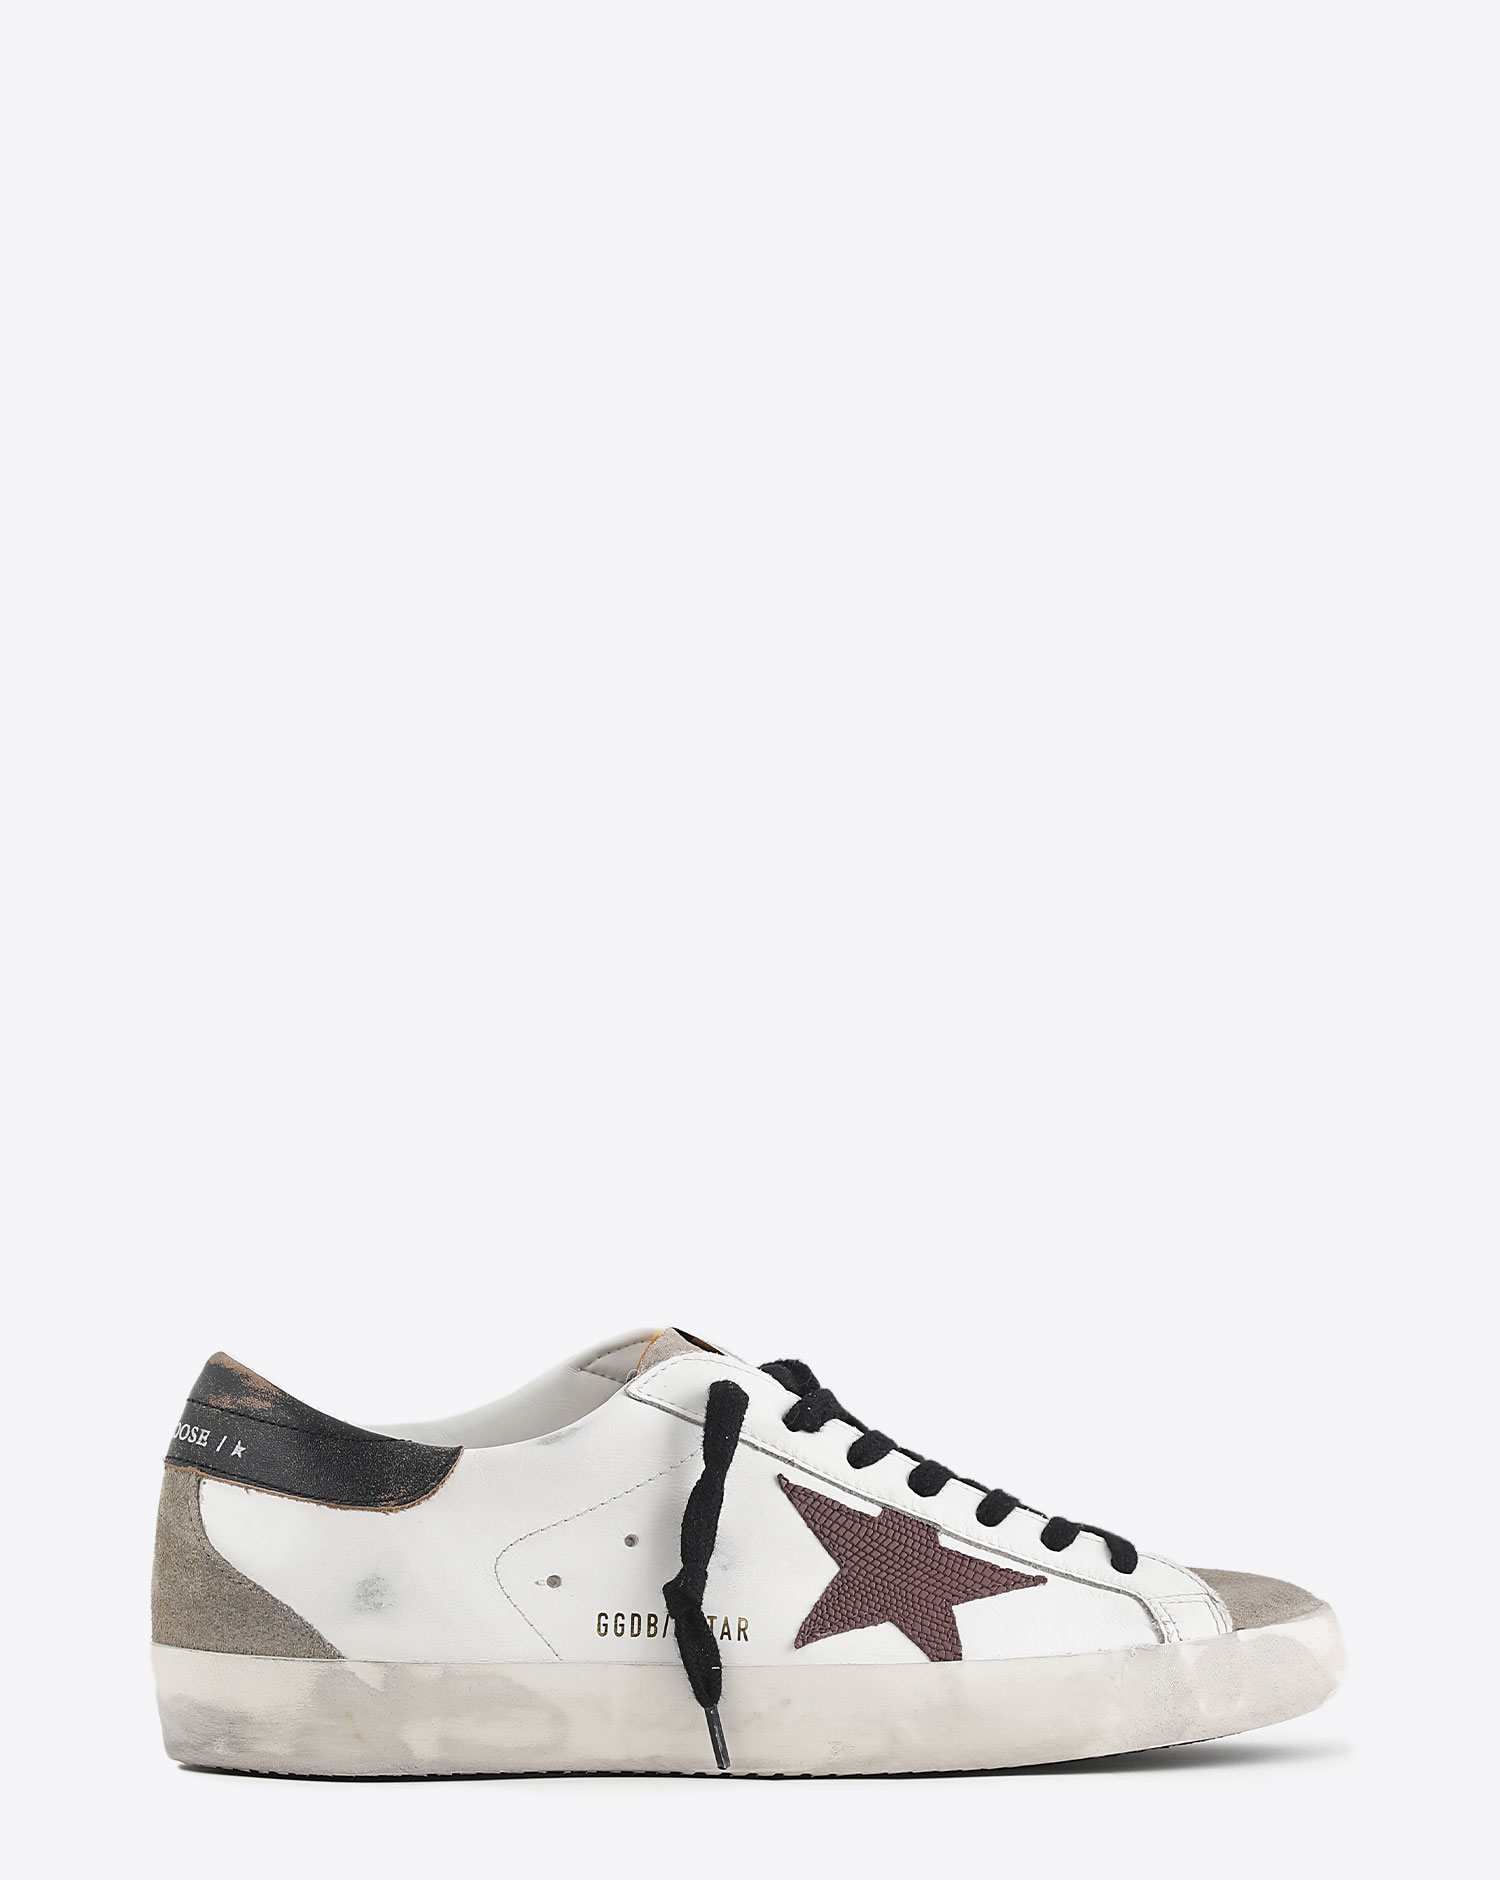 Golden Goose Sneakers Super-Star White Taupe Bordeaux 11394